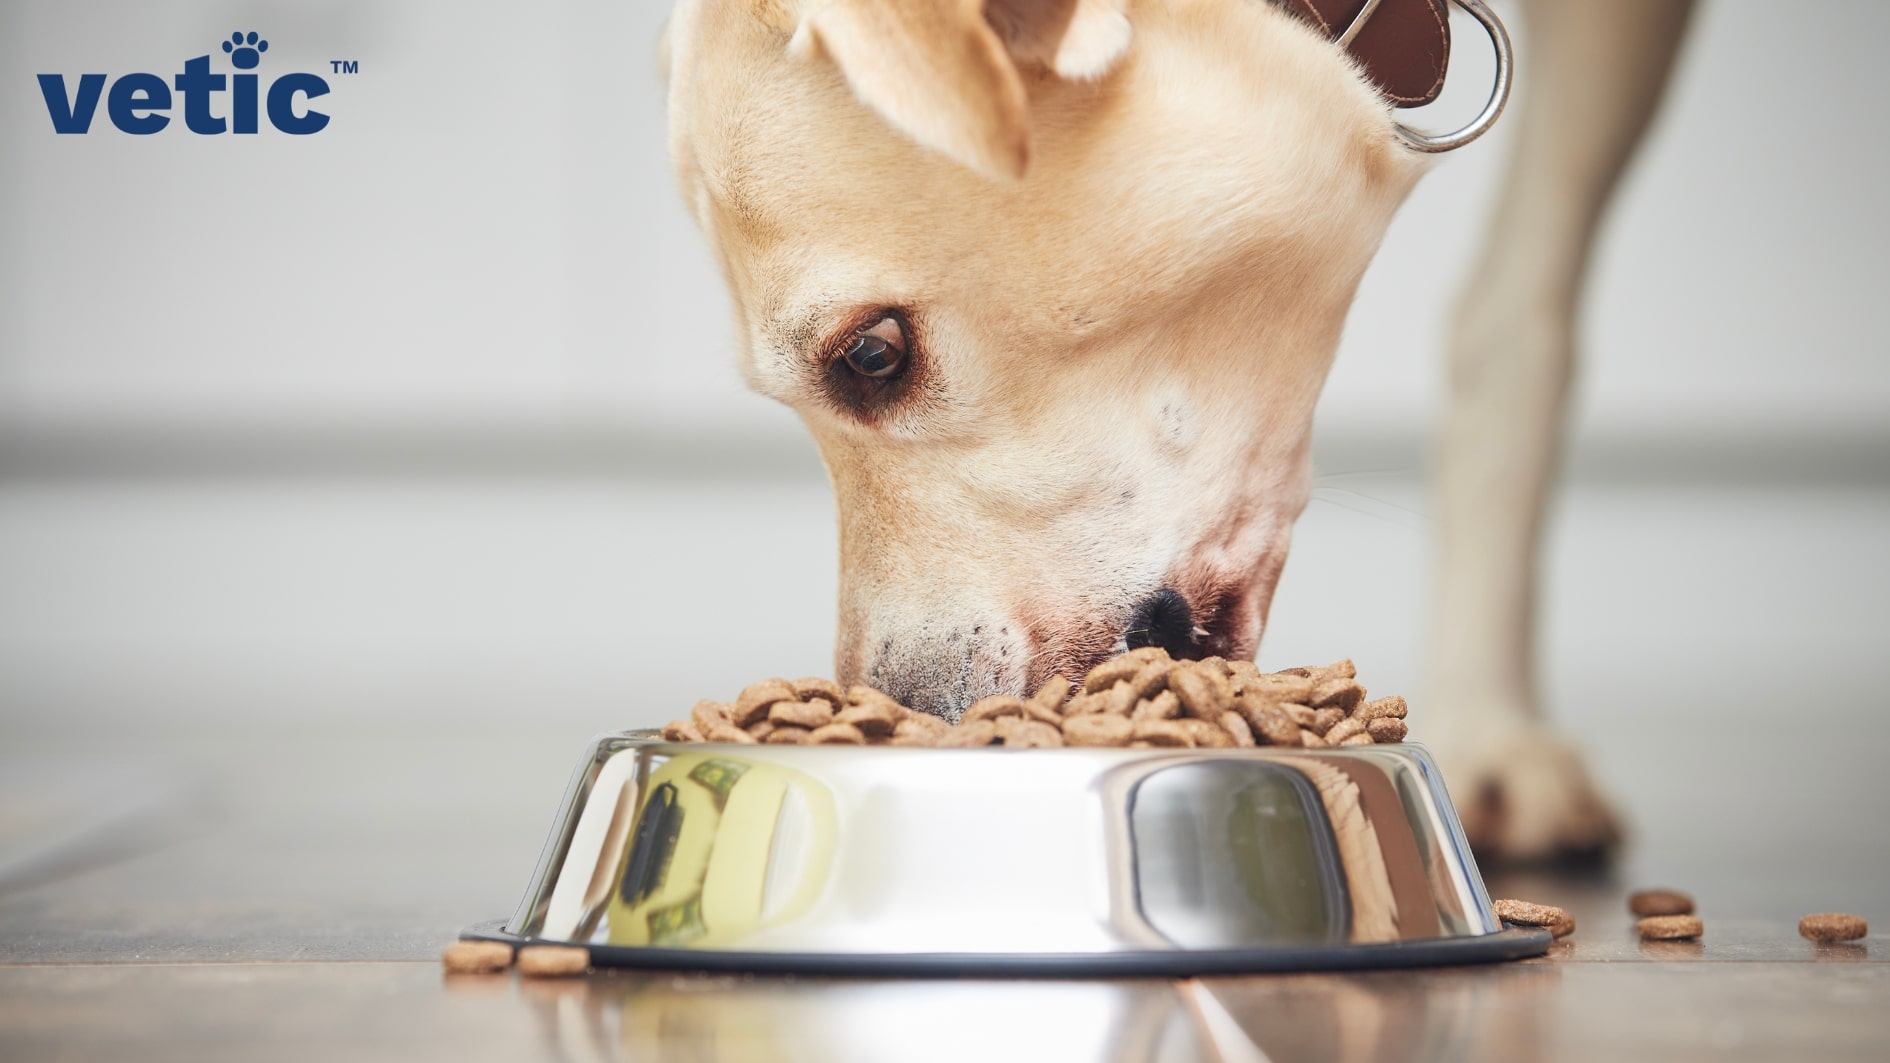 the closeup of a fawn labrador as they eat dry kibbles from a steel bowl in the ground. feeding large dogs from bowls kept at the ground-level can reduce the risk of bloat and gastric torsion